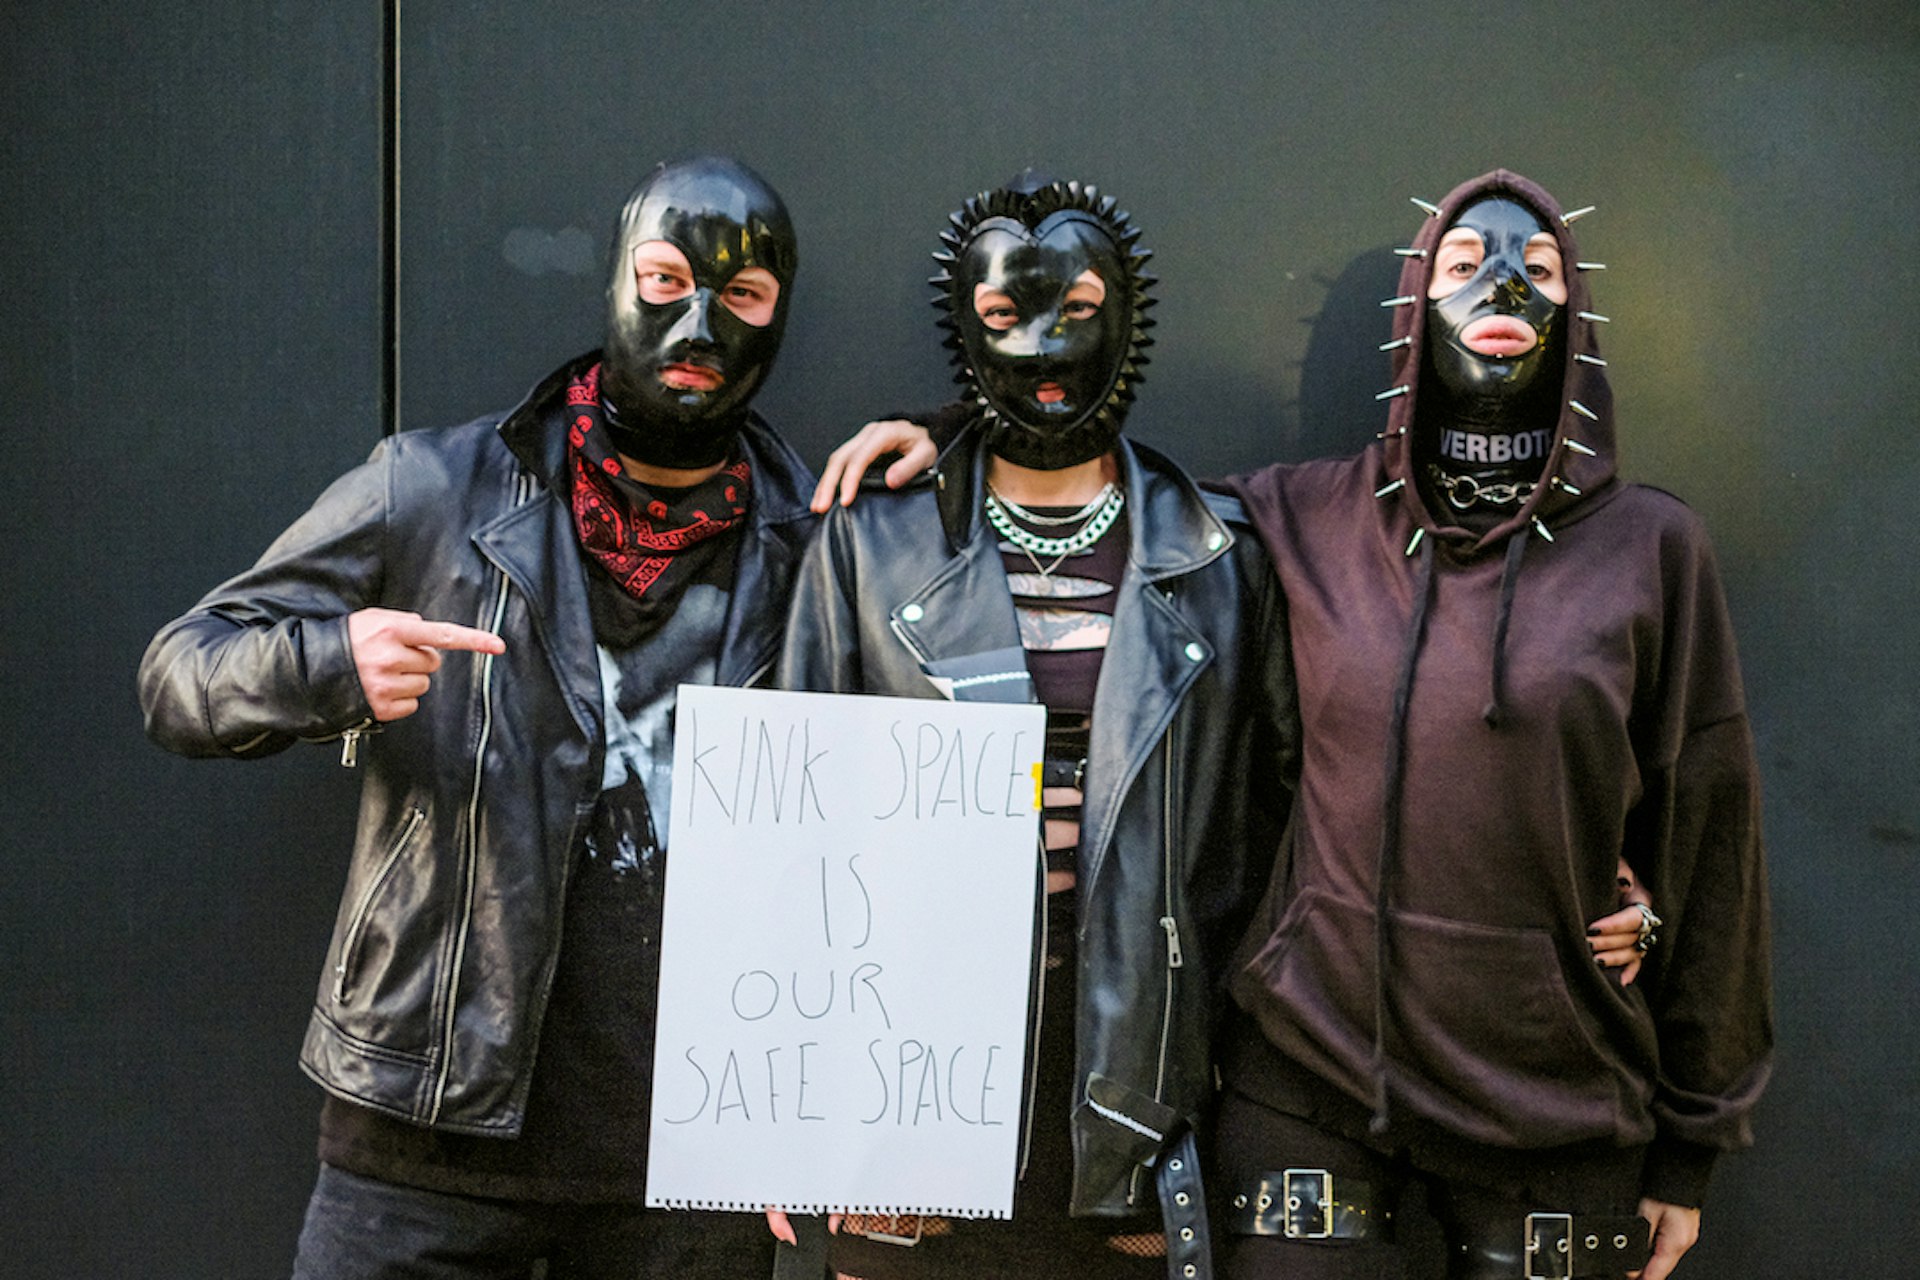 How protestors won the battle to save kink spaces